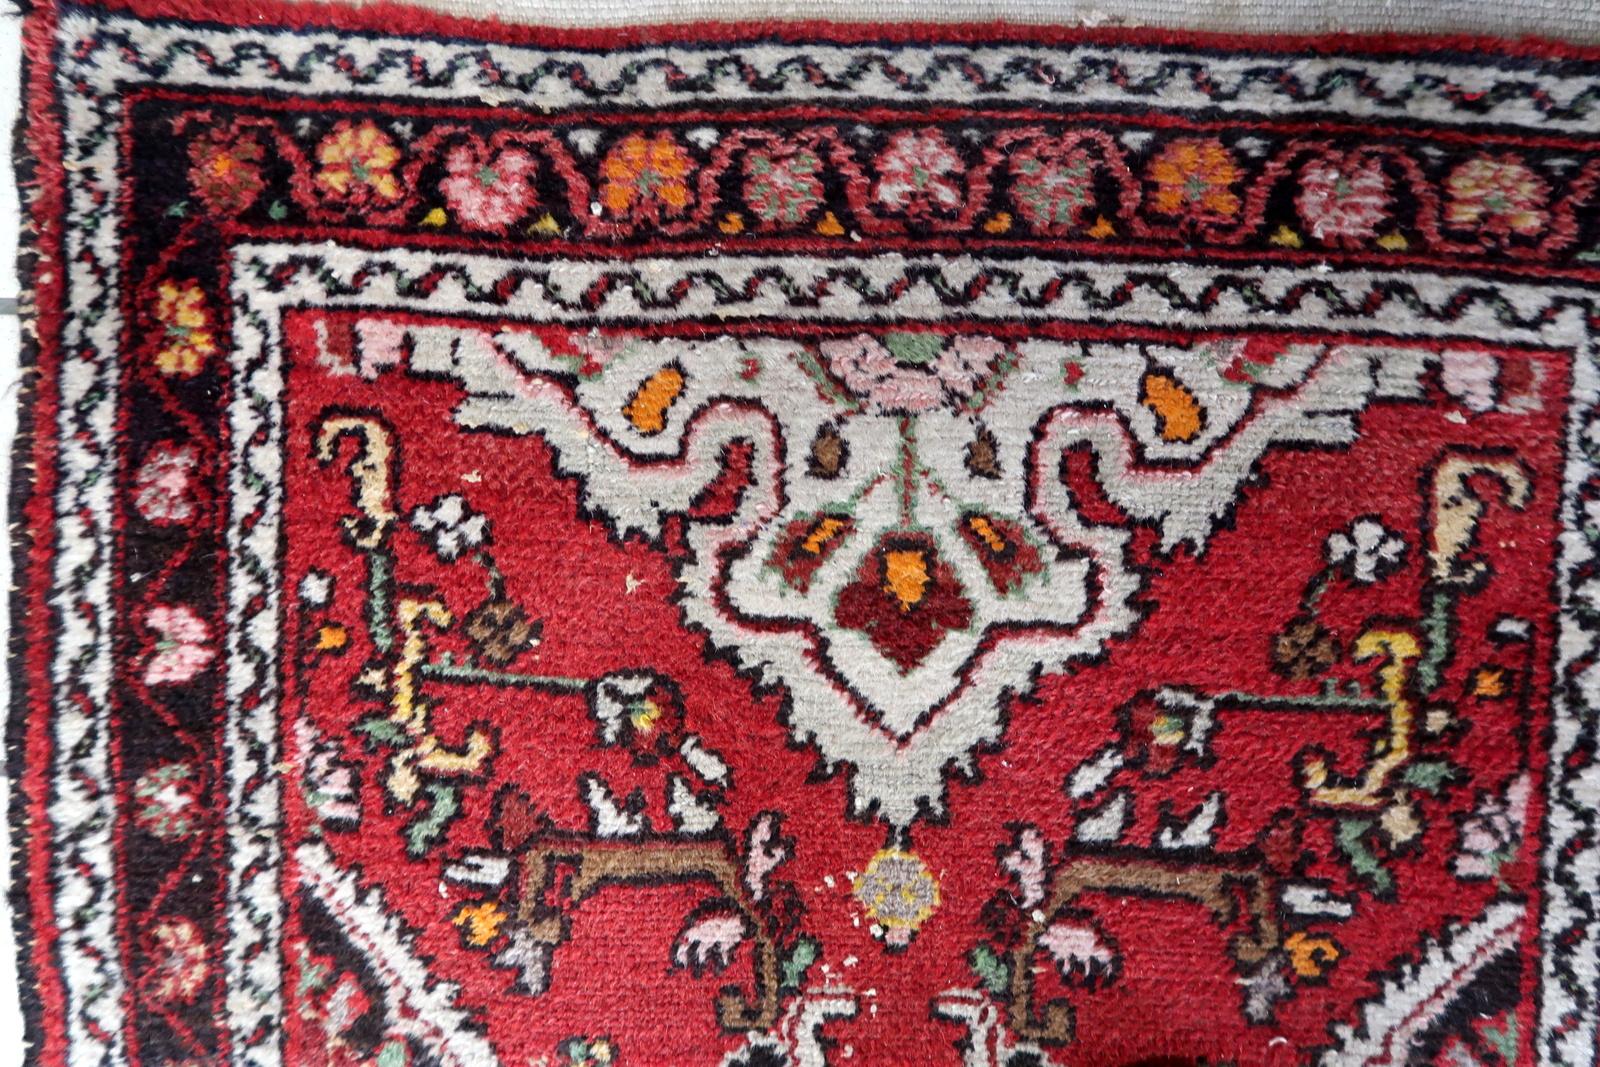 Handmade Antique Persian Malayer Runner Rug:

Design and Craftsmanship:
This narrow and long runner rug, dating back to the 1920s, hails from the Malayer region in Northwest Persia.
Its elongated dimensions of 2.5’ x 12.5’ (or 77cm x 382cm) make it